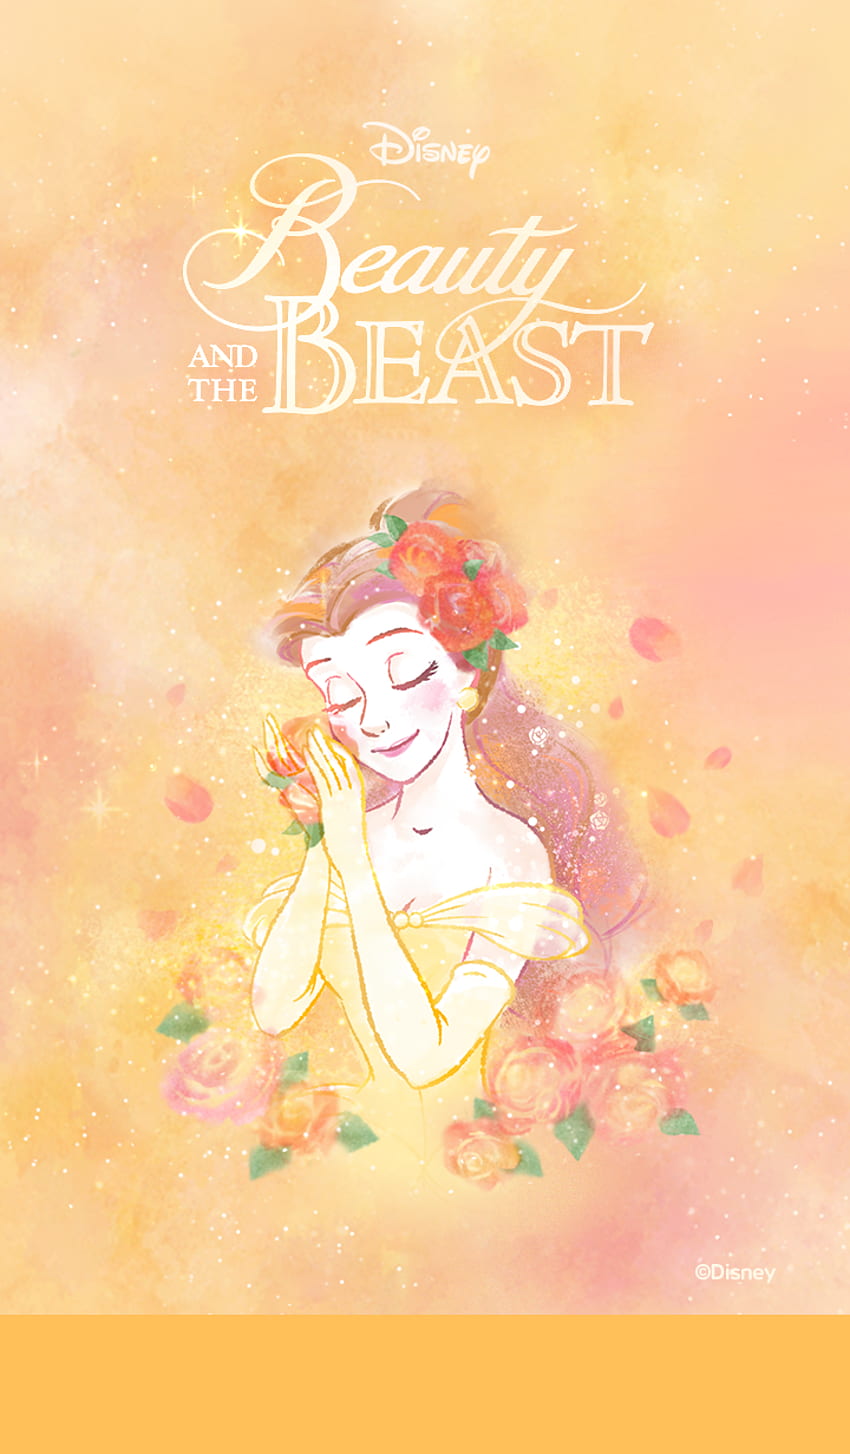 Disney Princess Belle from Beauty and the Beast with a soft yellow and pink background - Belle